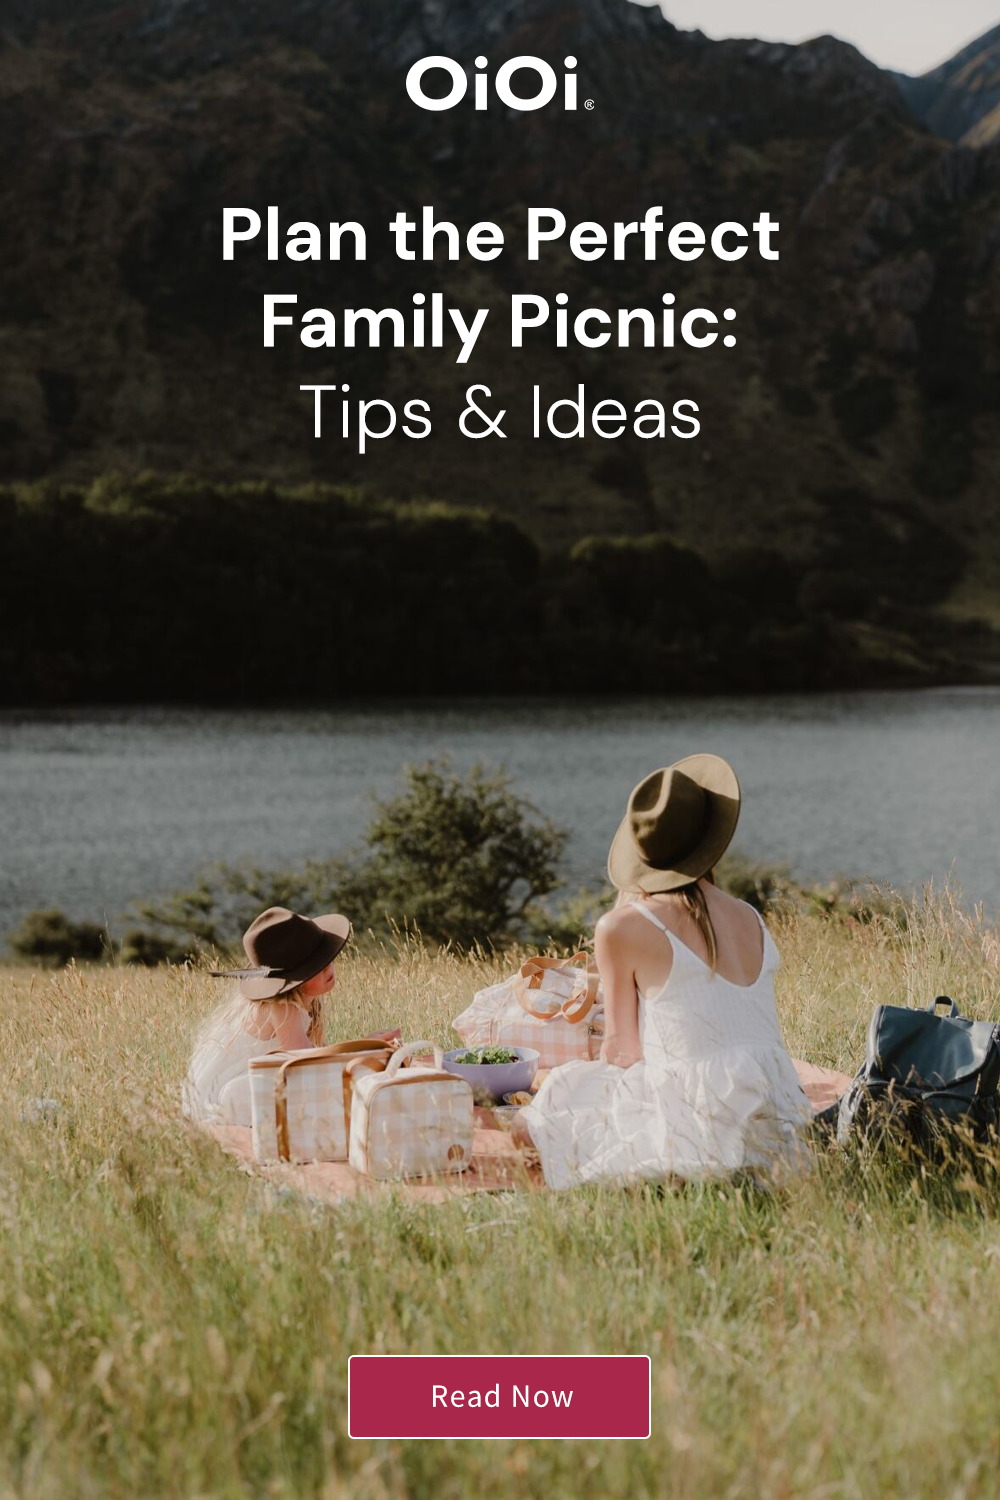 How to plan the perfect family picnic